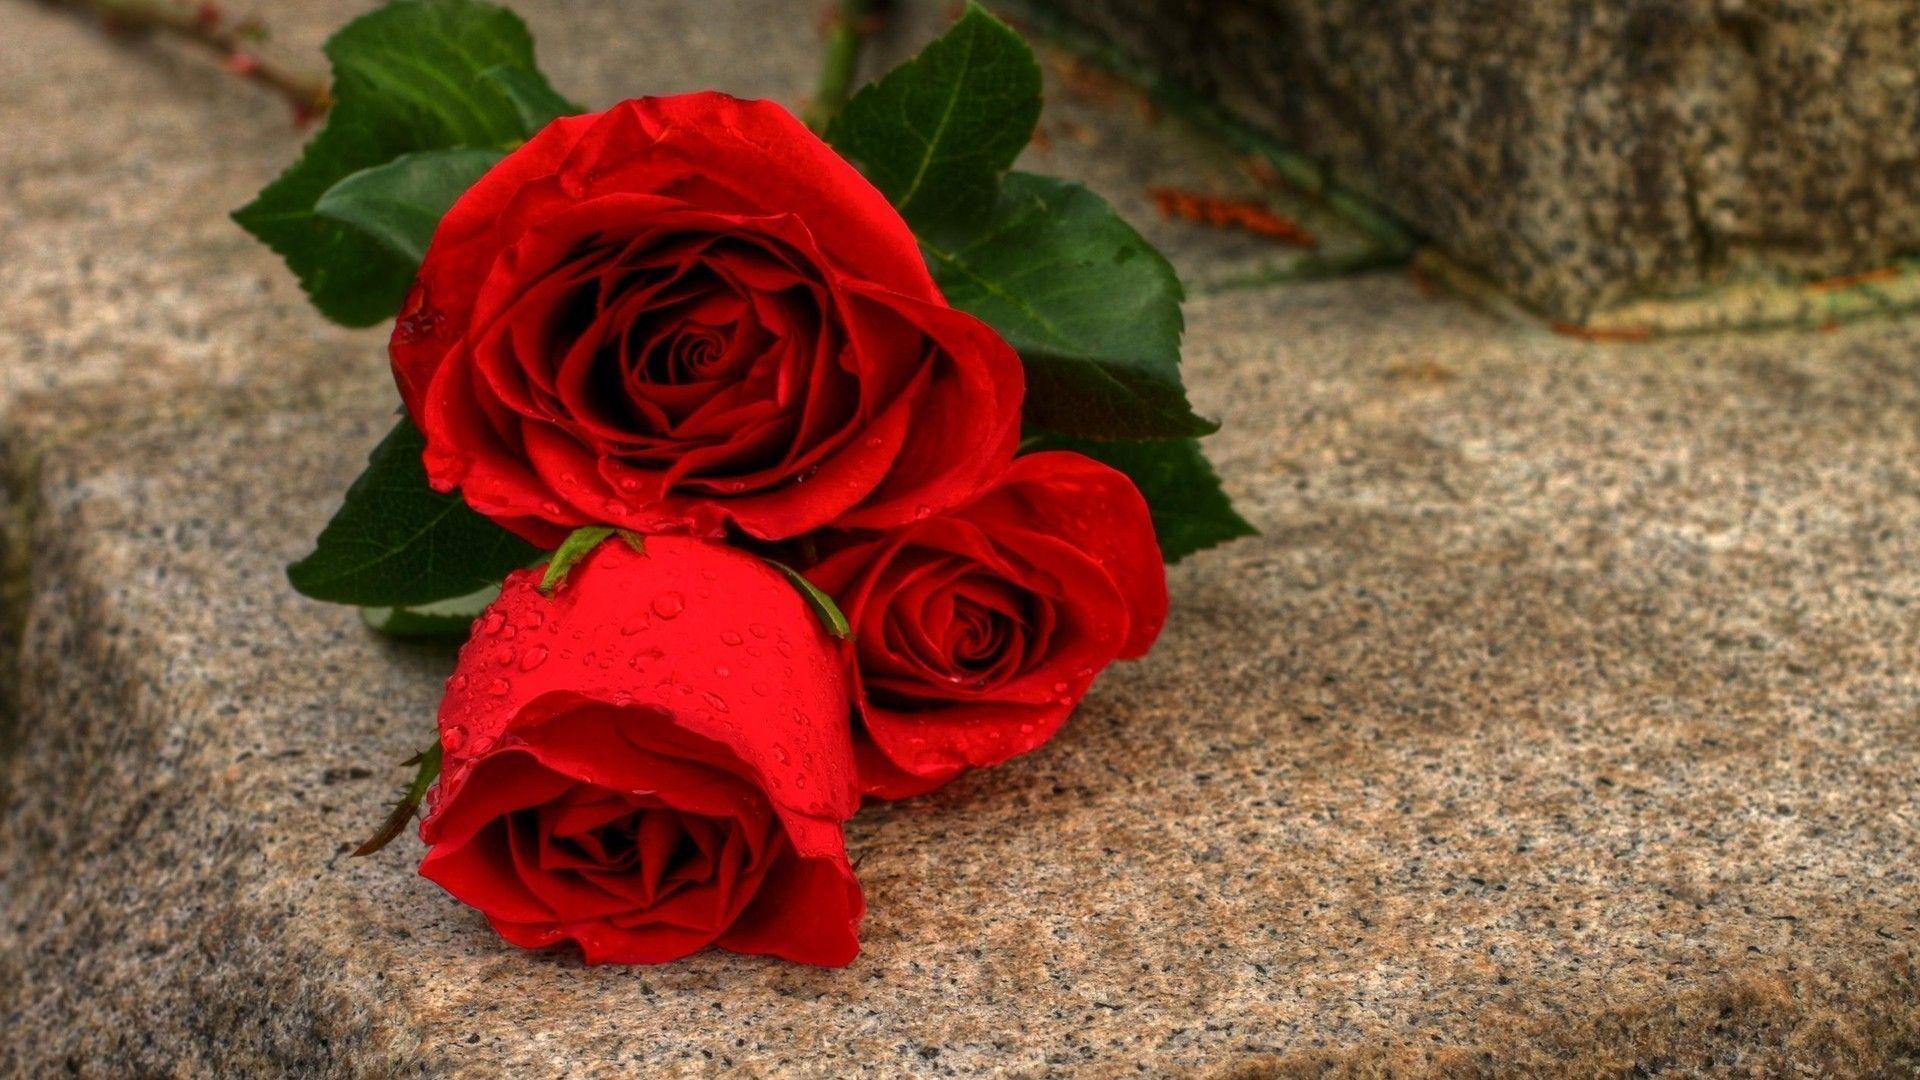 Fresh Red Roses Flowers HD Wallpaper Download Flower 1920x1080PX